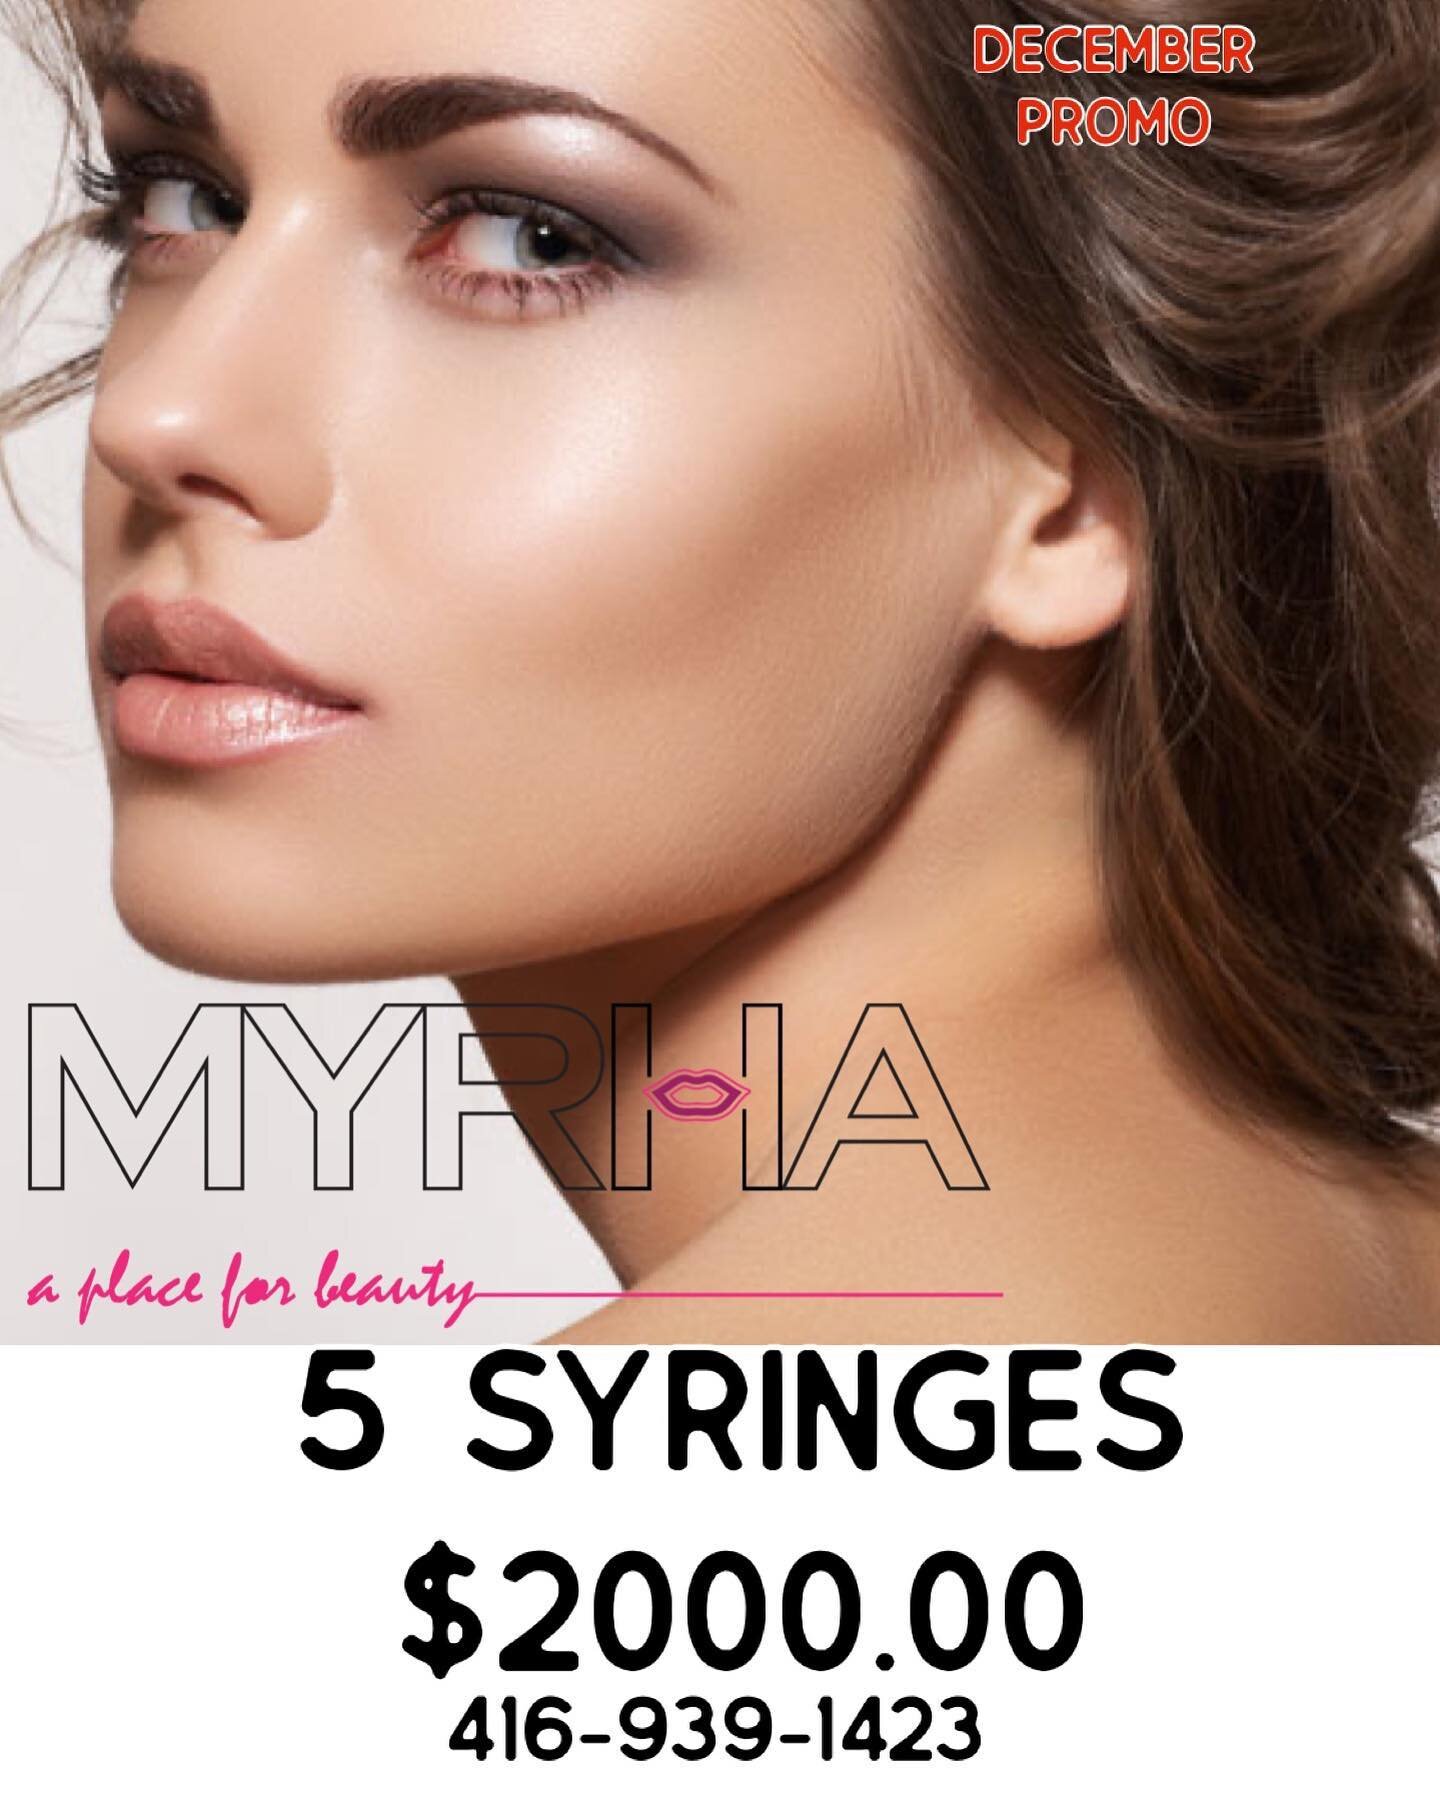 2 syringes for $975
4 syringes for $1750
5 syringes for $2000
Great for facial contouring, jawline, chin area, cheekbones, tear troughs, temples and forehead area. 
⠀
🅜🅨 🅦🅞🅡🅚 #6ixlips #myrhalips
𝙁𝙤𝙧 𝙋𝙧𝙤𝙛𝙚𝙨𝙨𝙞𝙤𝙣𝙖𝙡 𝙥𝙖𝙜𝙚, 𝙫𝙞𝙨?